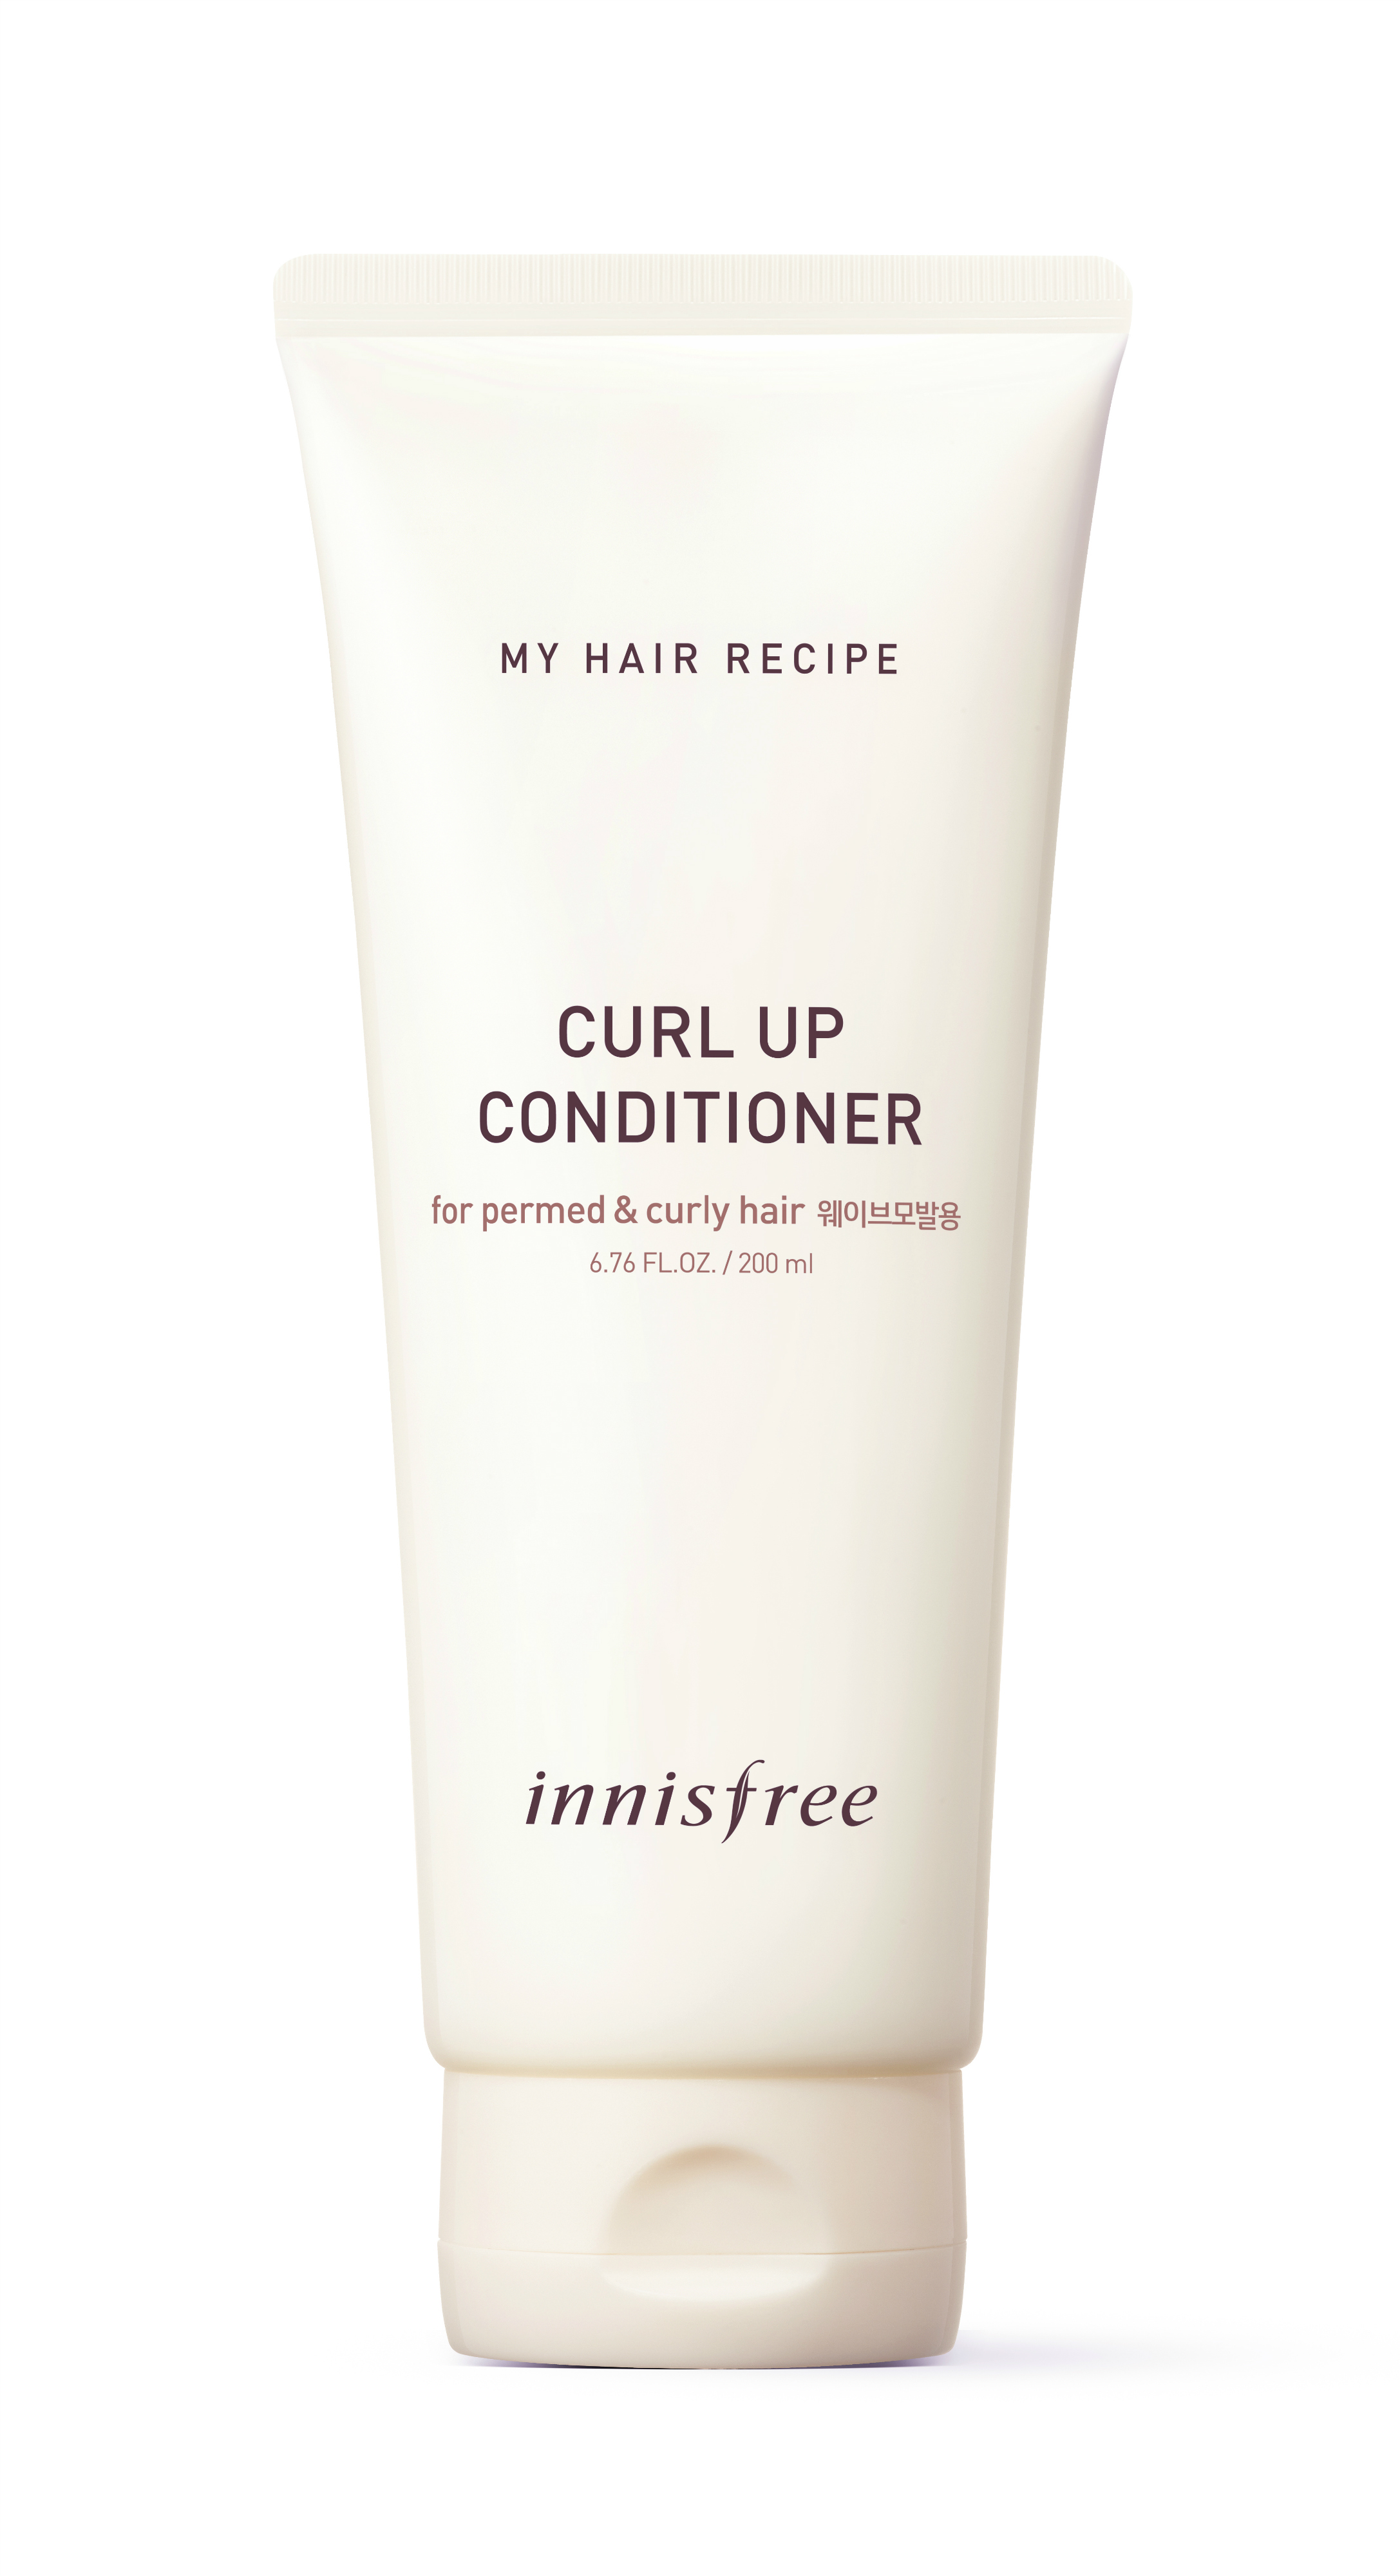 innisfree My Hair Recipe Curl Up Conditioner (RM48.00/200ml)-Pamper.my